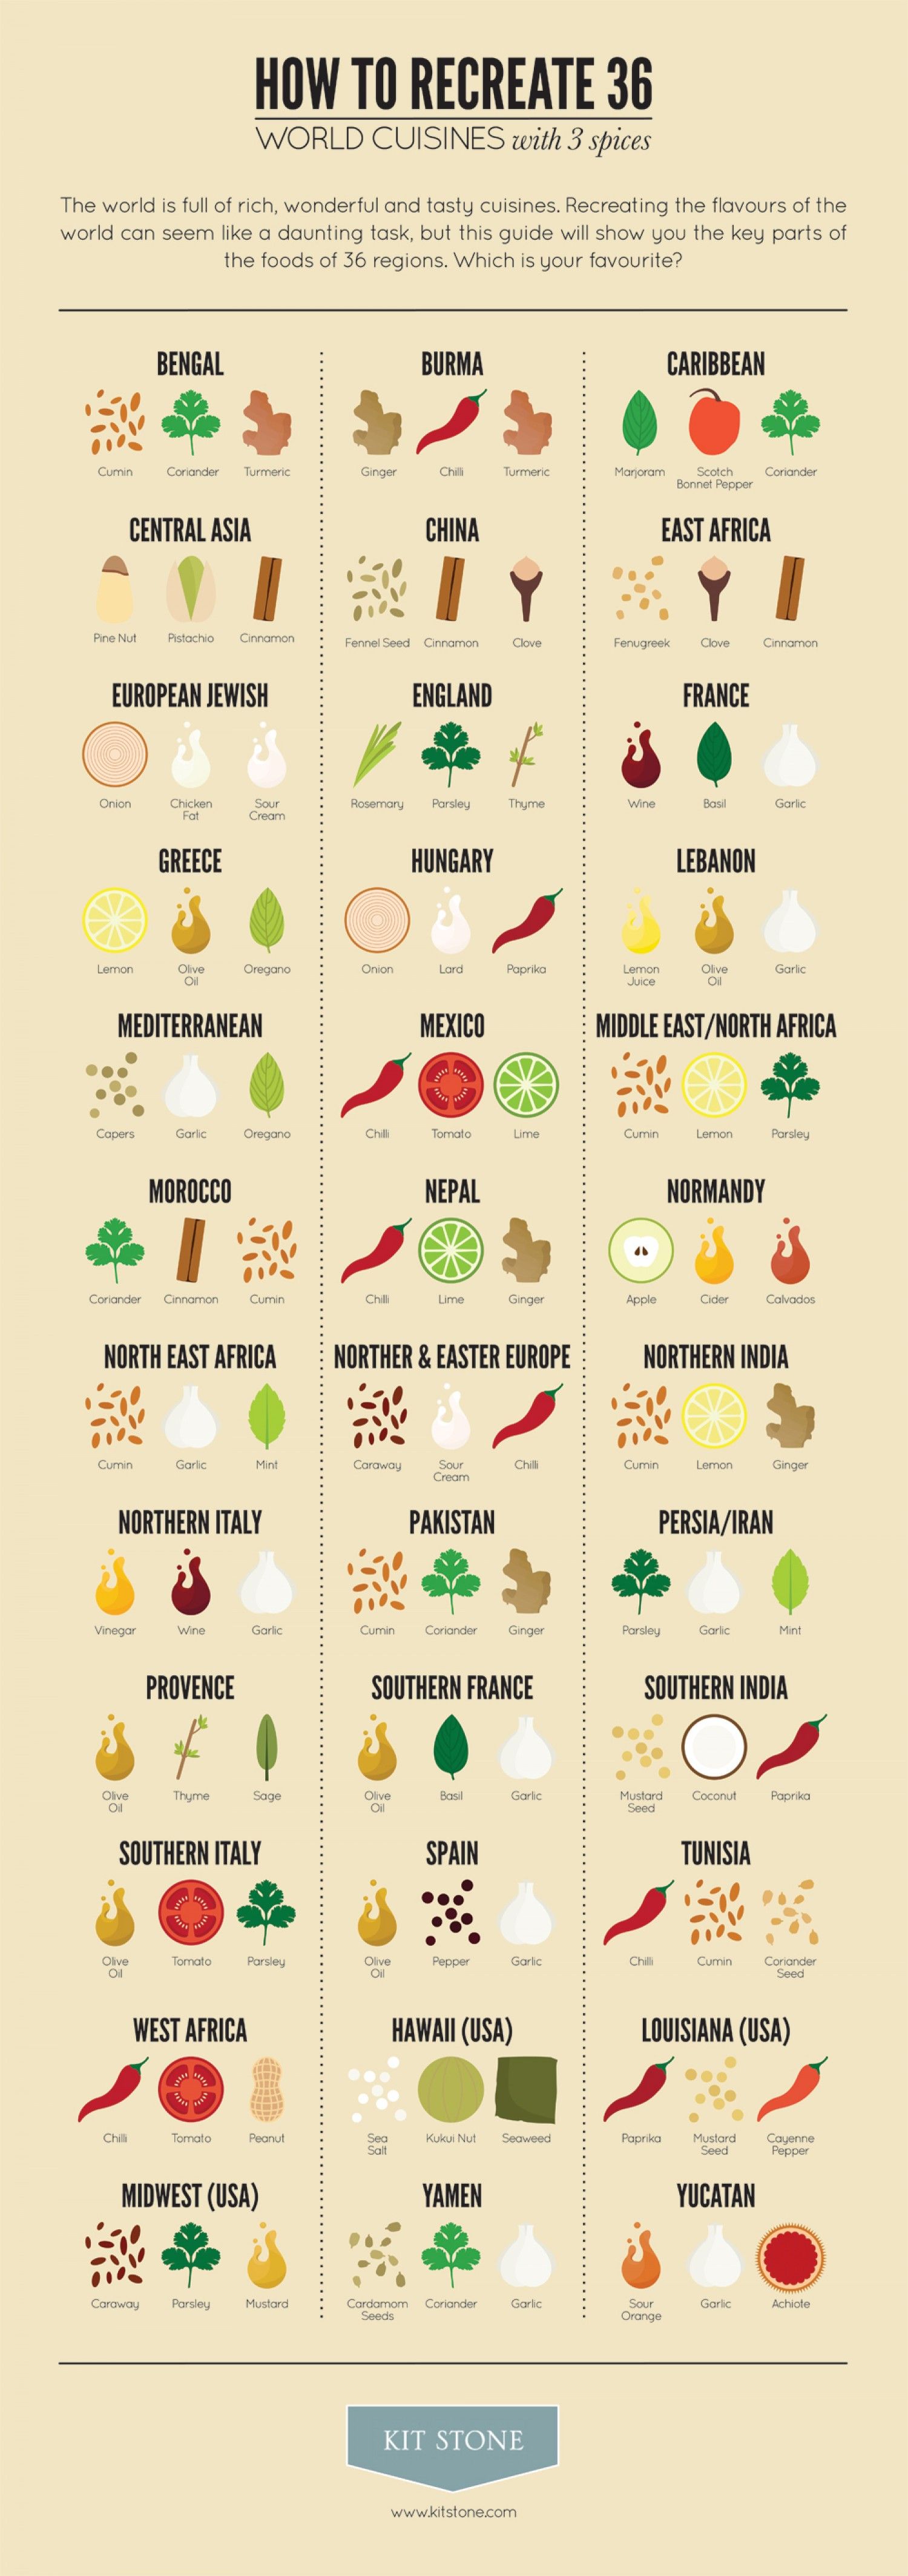 World Cuisines With 3 Spices